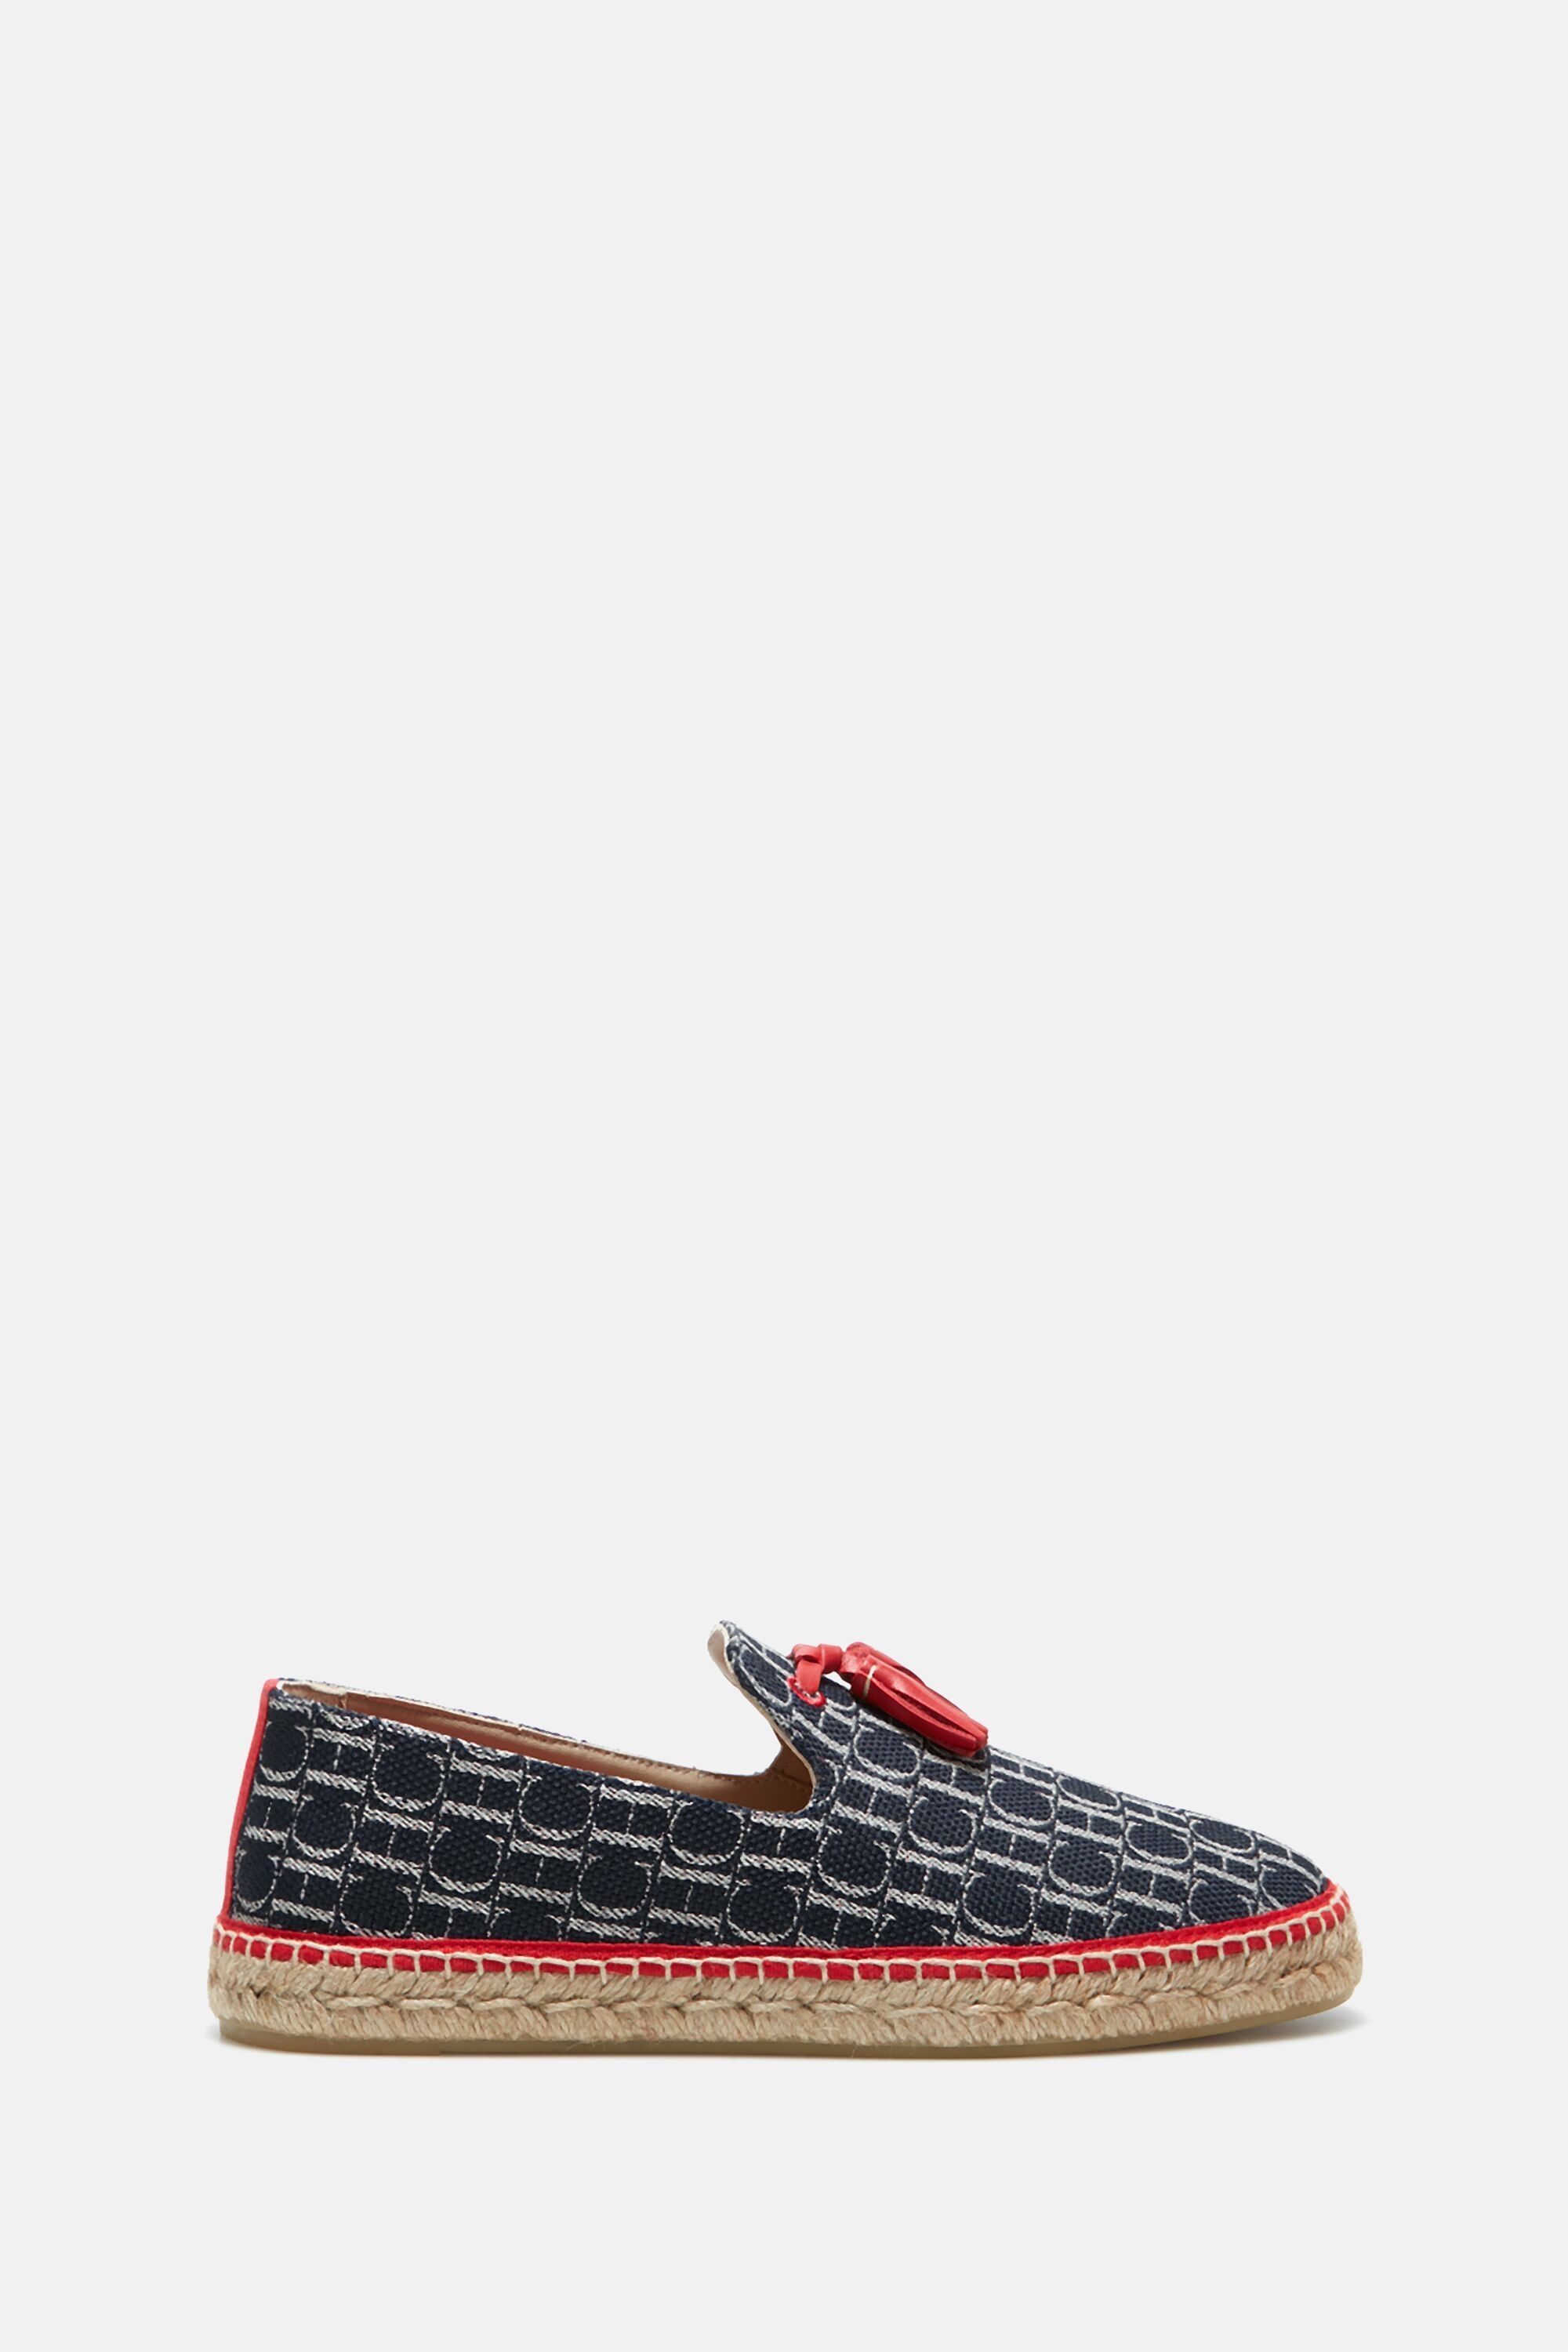 Canvas espadrilles with tassels